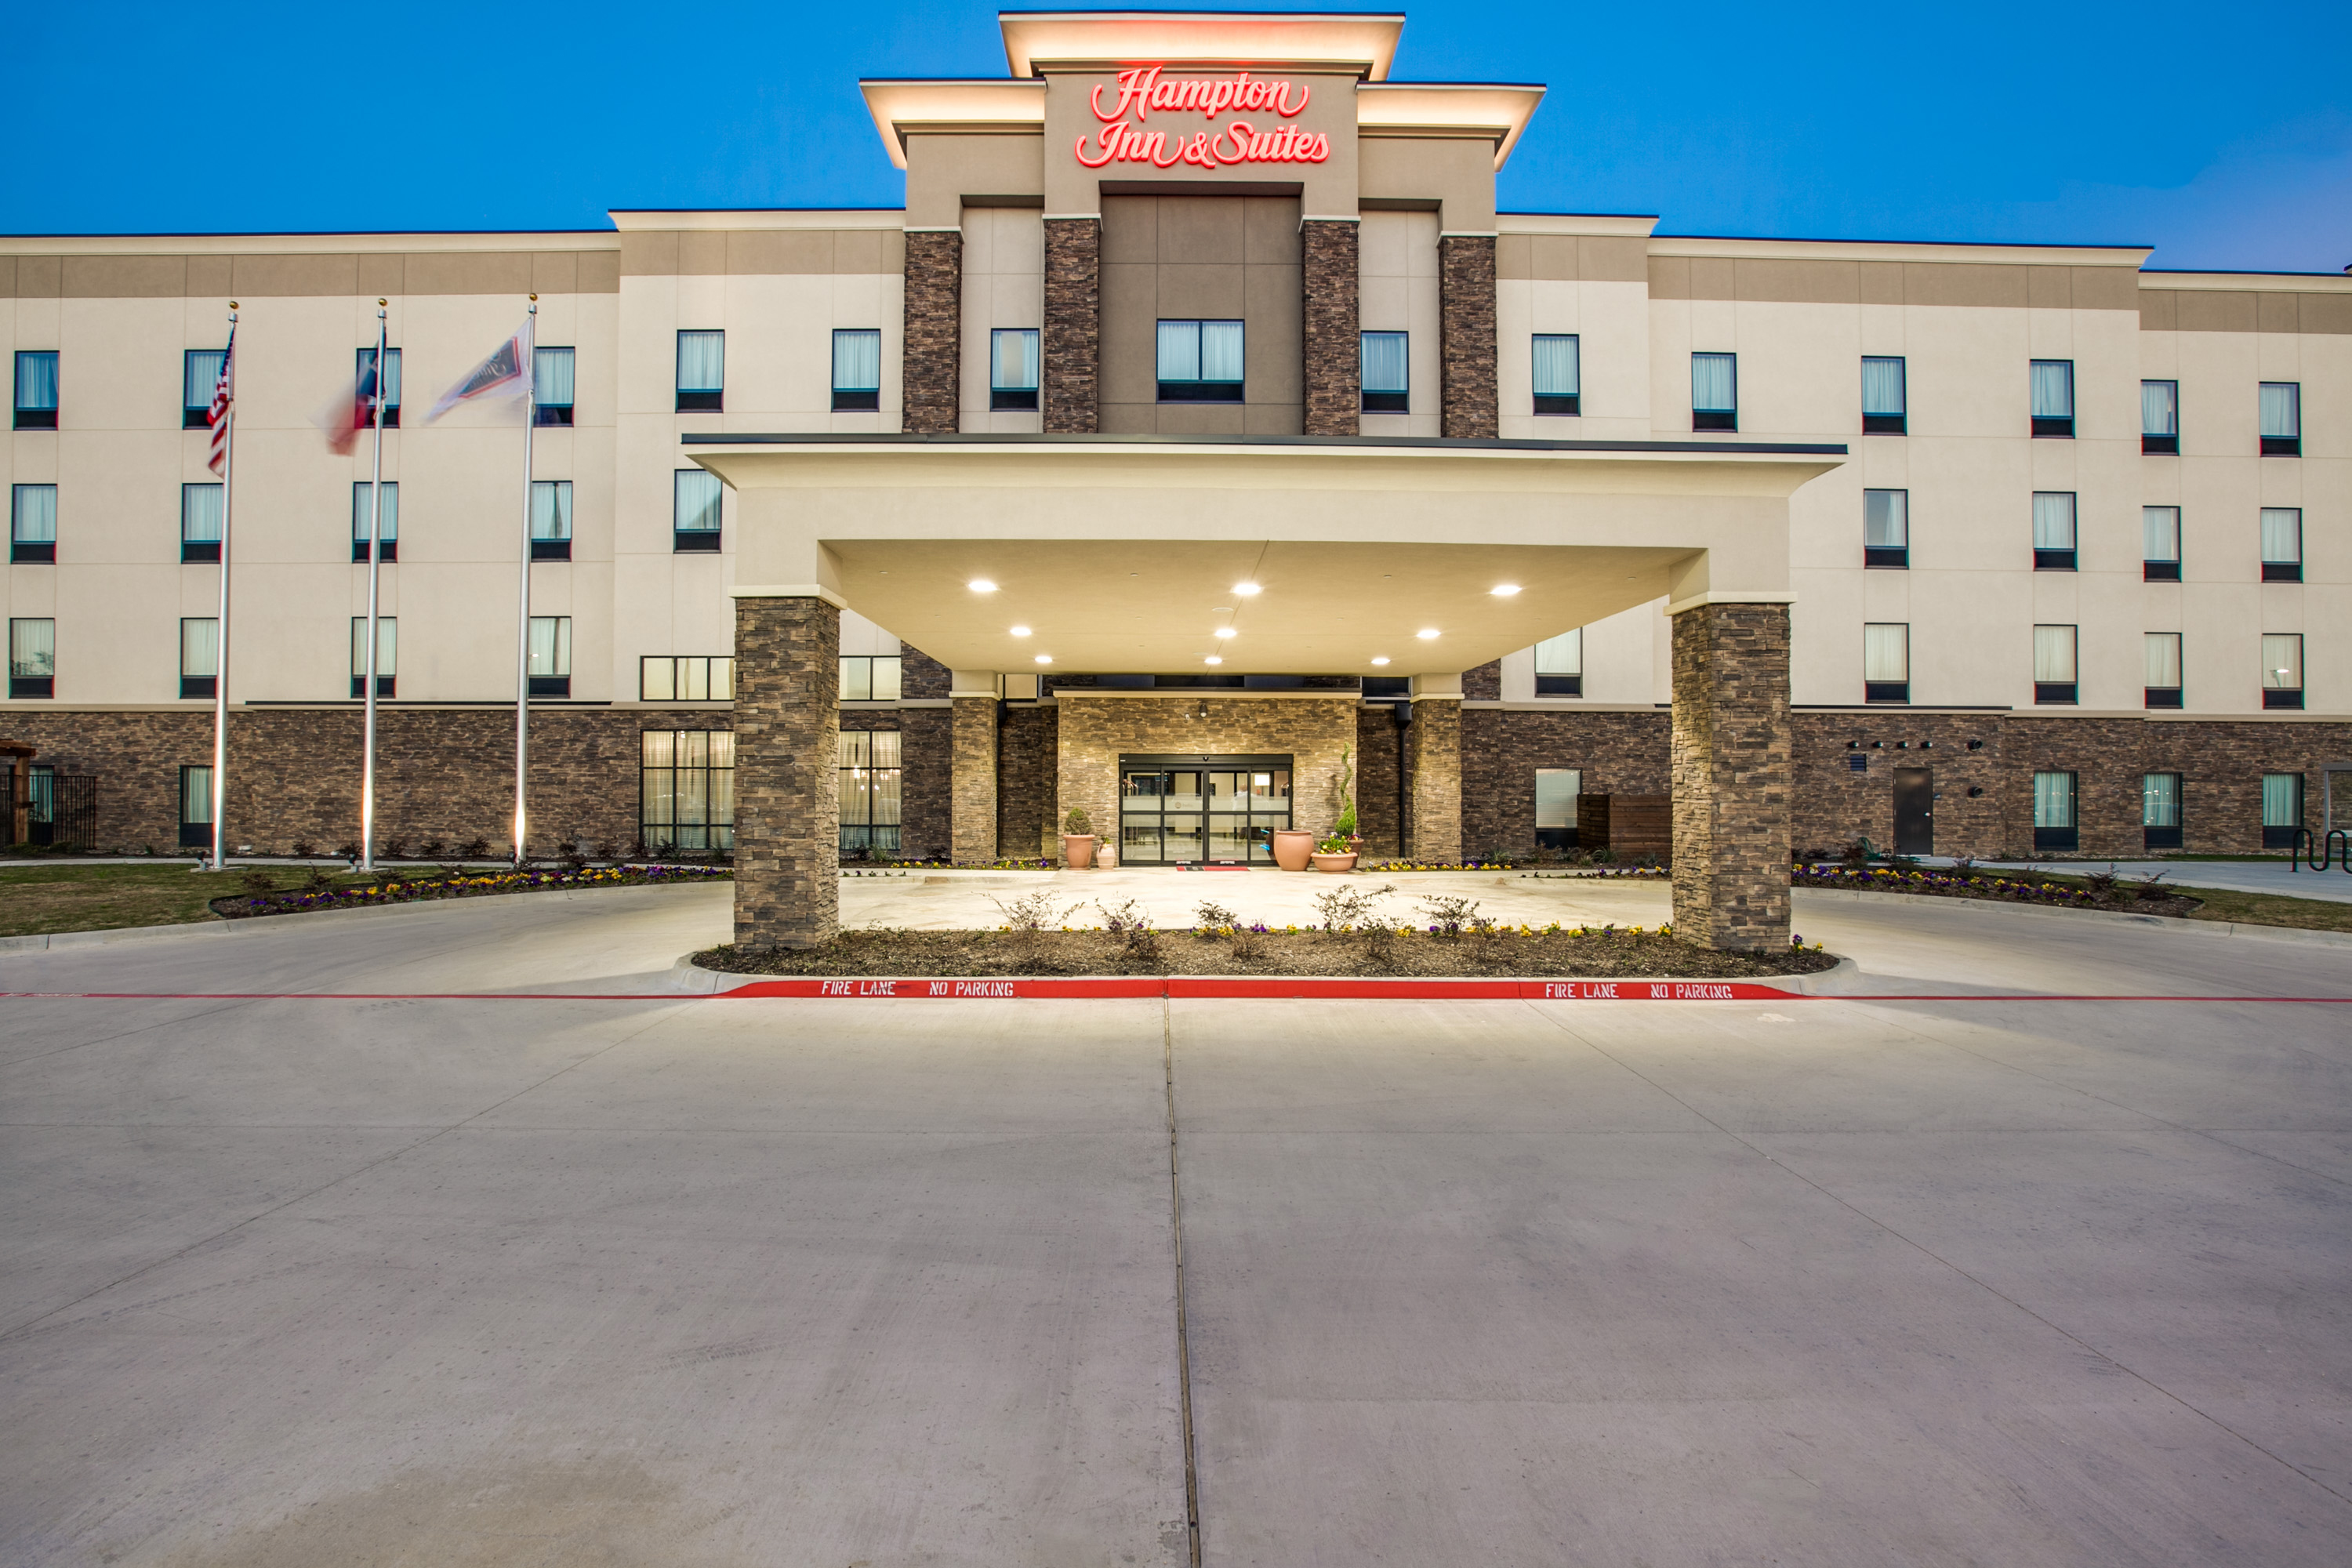 The portfolio consists of three institutional-grade Hilton hotels comprising 369 rooms in Texas Alabama and Louisiana